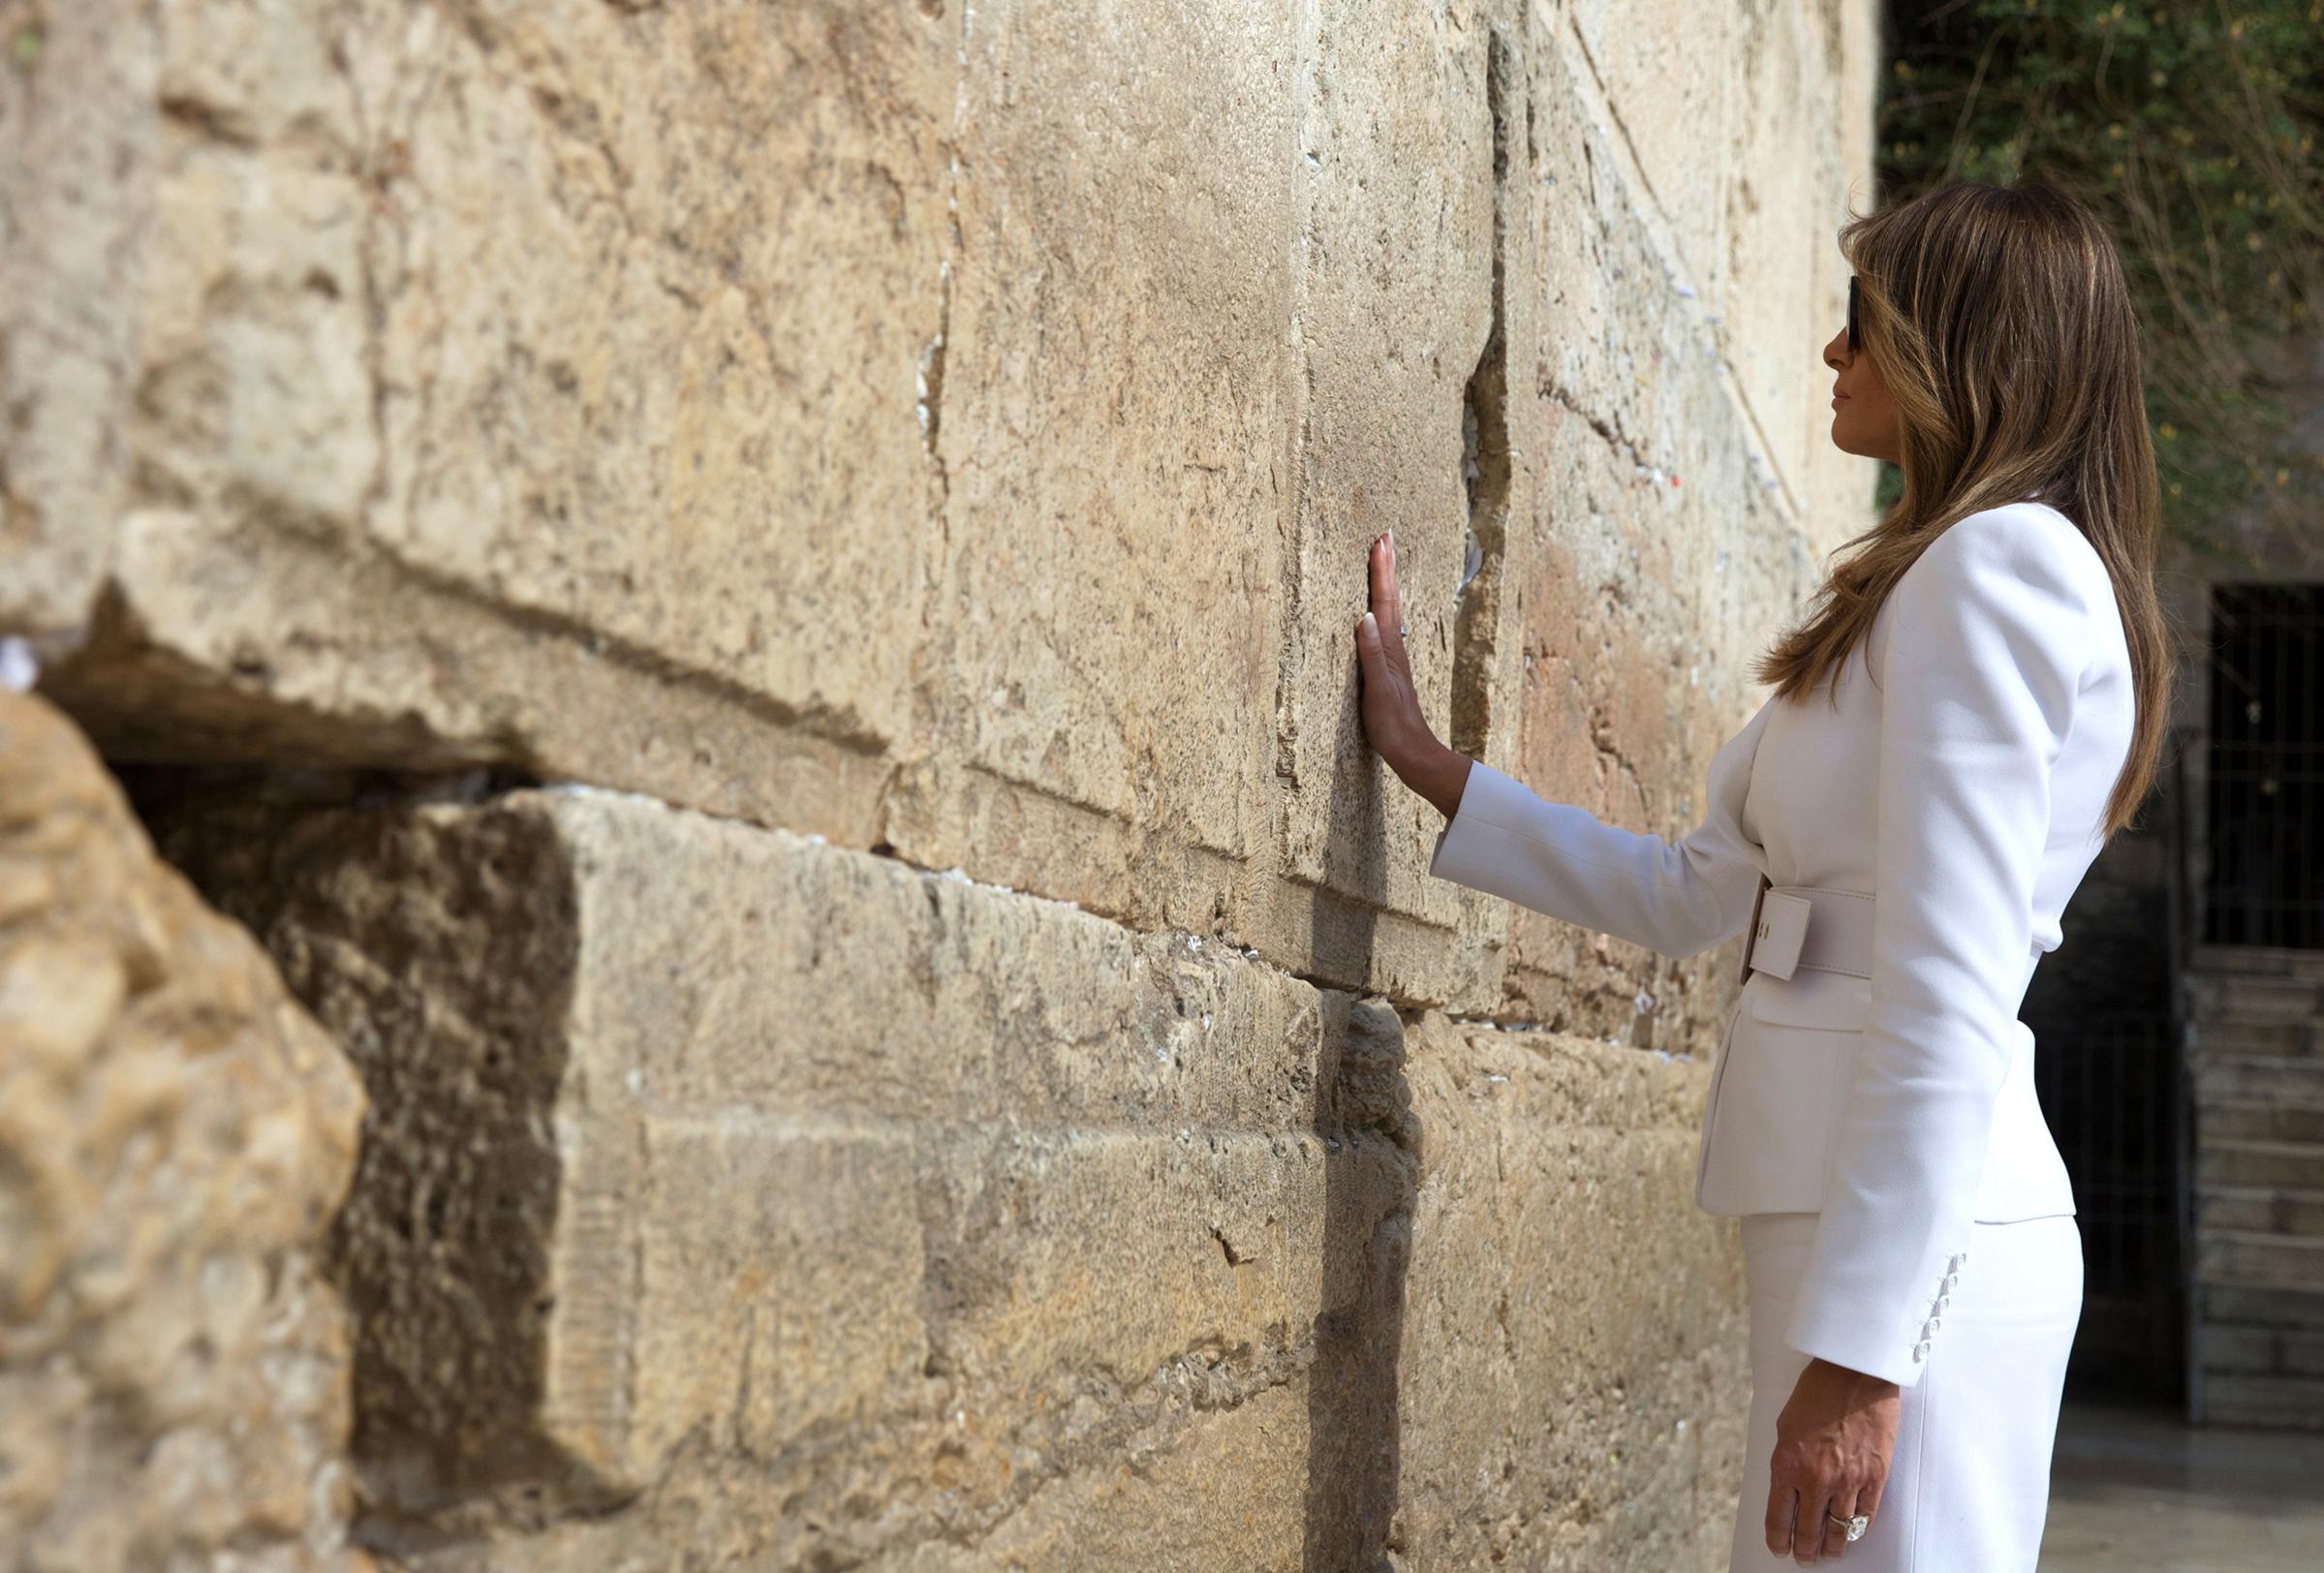 First lady Melania Trump wearing white Michael Kors Collection suit, visits the Western Wall, the holiest site where Jews can pray, in Jerusalems Old City on May 22, 2017.